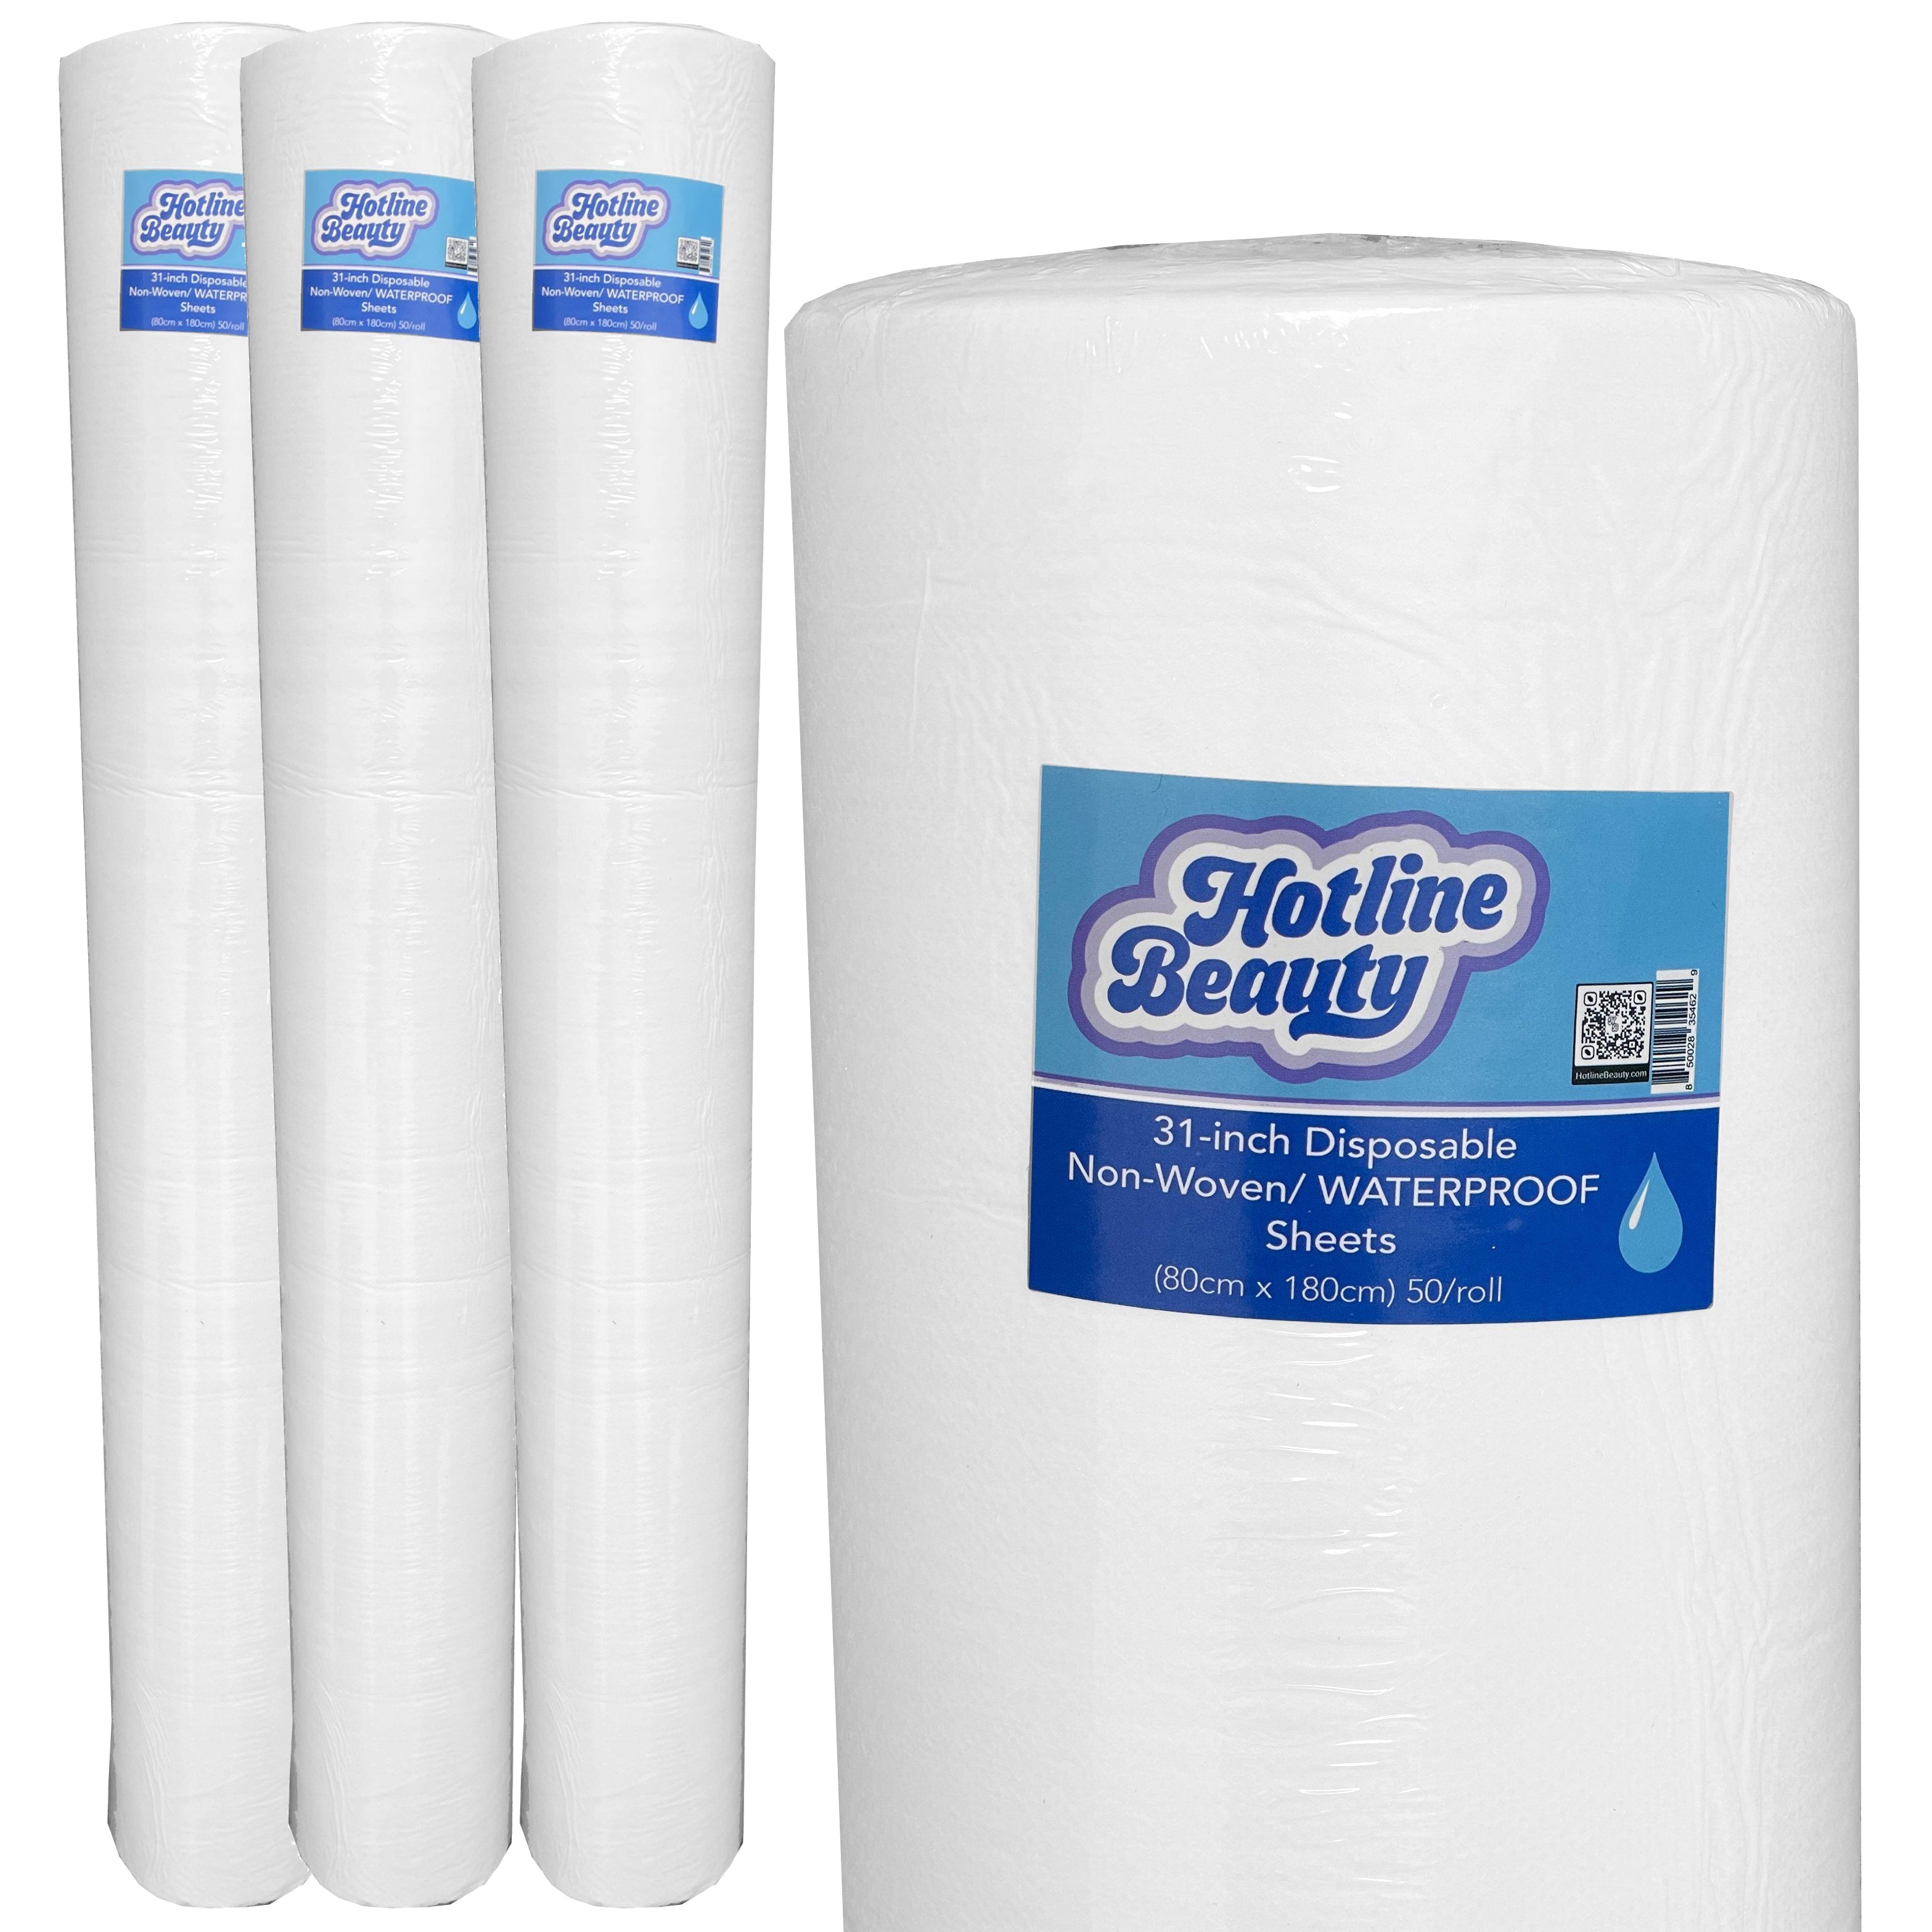 Buy 3, Get 1 Free | Disposable Sheets Rolls | HOTLINE BEAUTY Spas HOTLINE BEAUTY 31 inch Disposable Non-Woven / WATERPROOF Sheets | 80cm x 180cm | 50 Roll 